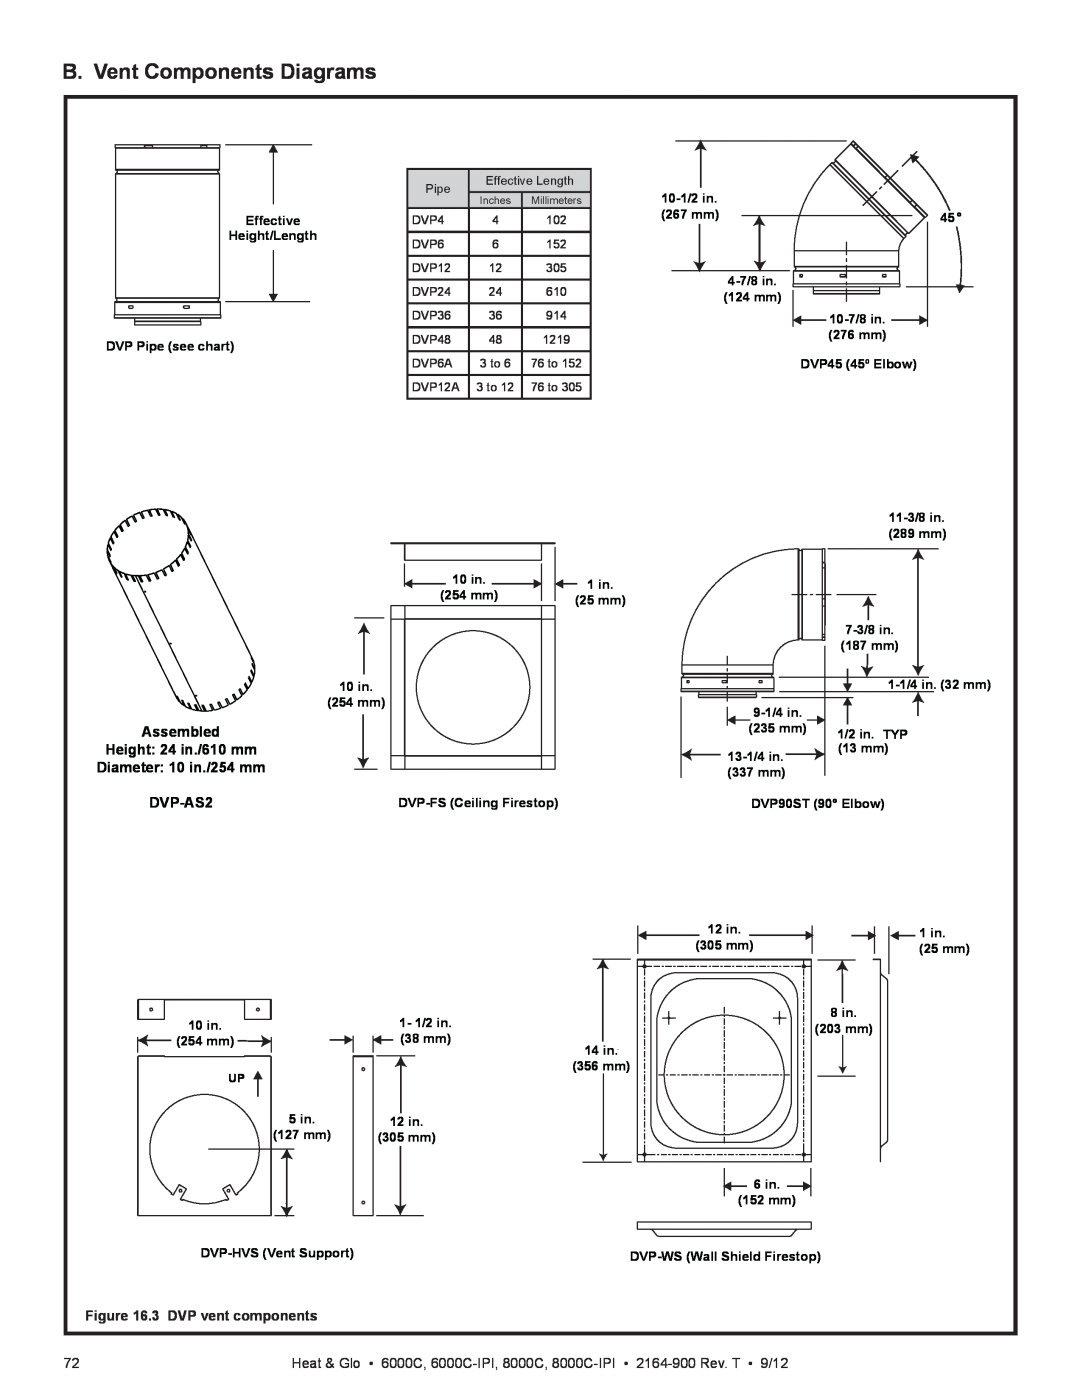 Heat & Glo LifeStyle 6000C manual B. Vent Components Diagrams, Height: 24 in./610 mm, DVP-AS2 